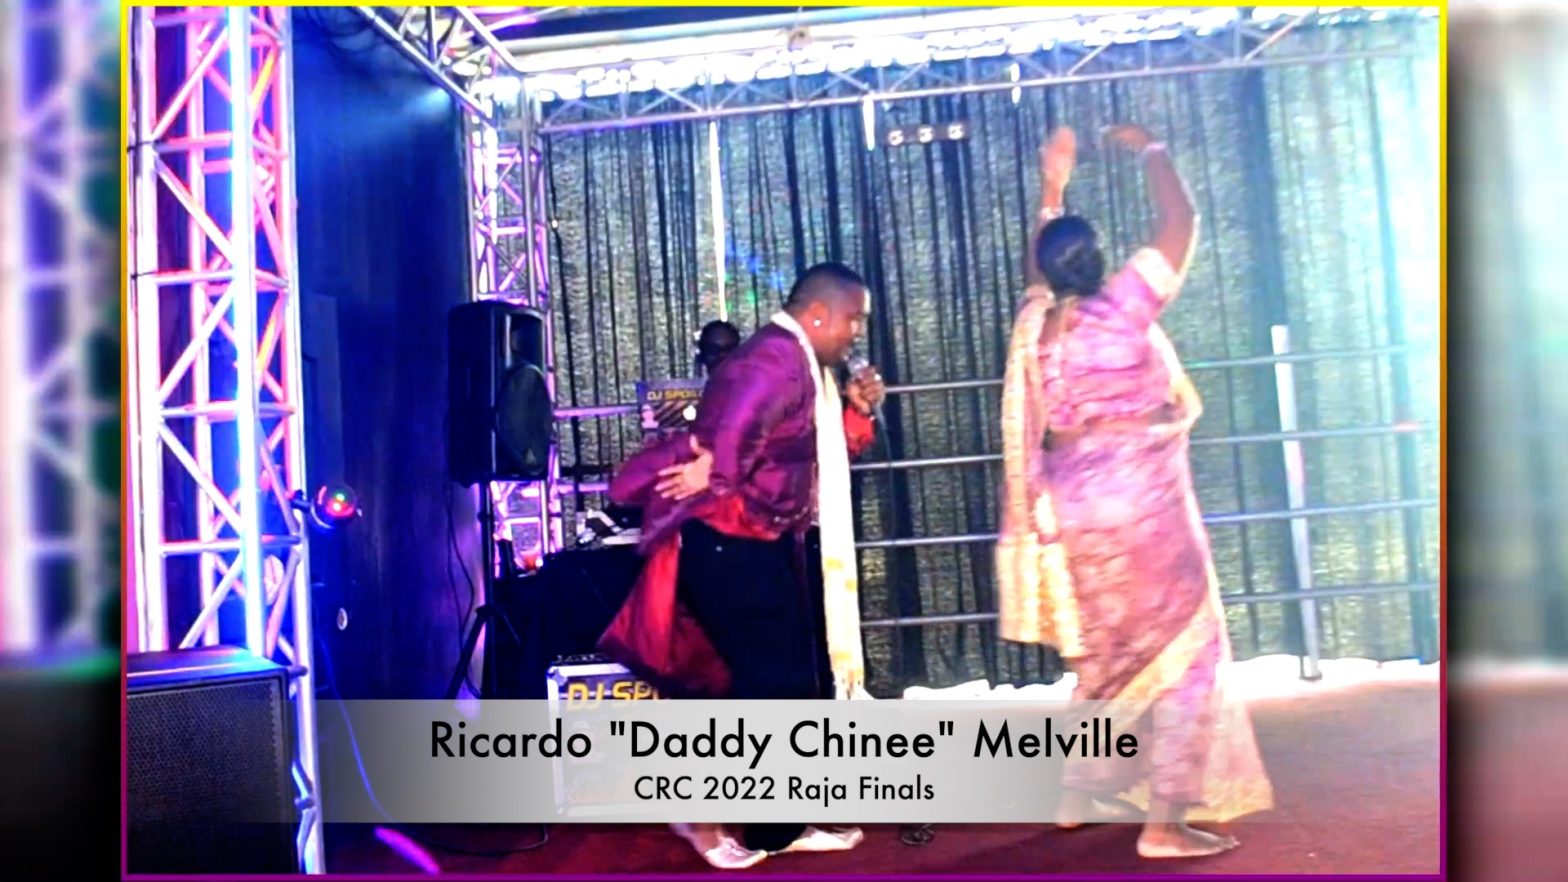 Ricardo Melville better known as Daddy Chinee won the Chutneymusic.com CRC 2022 Raja Title by unanimous judges decision.